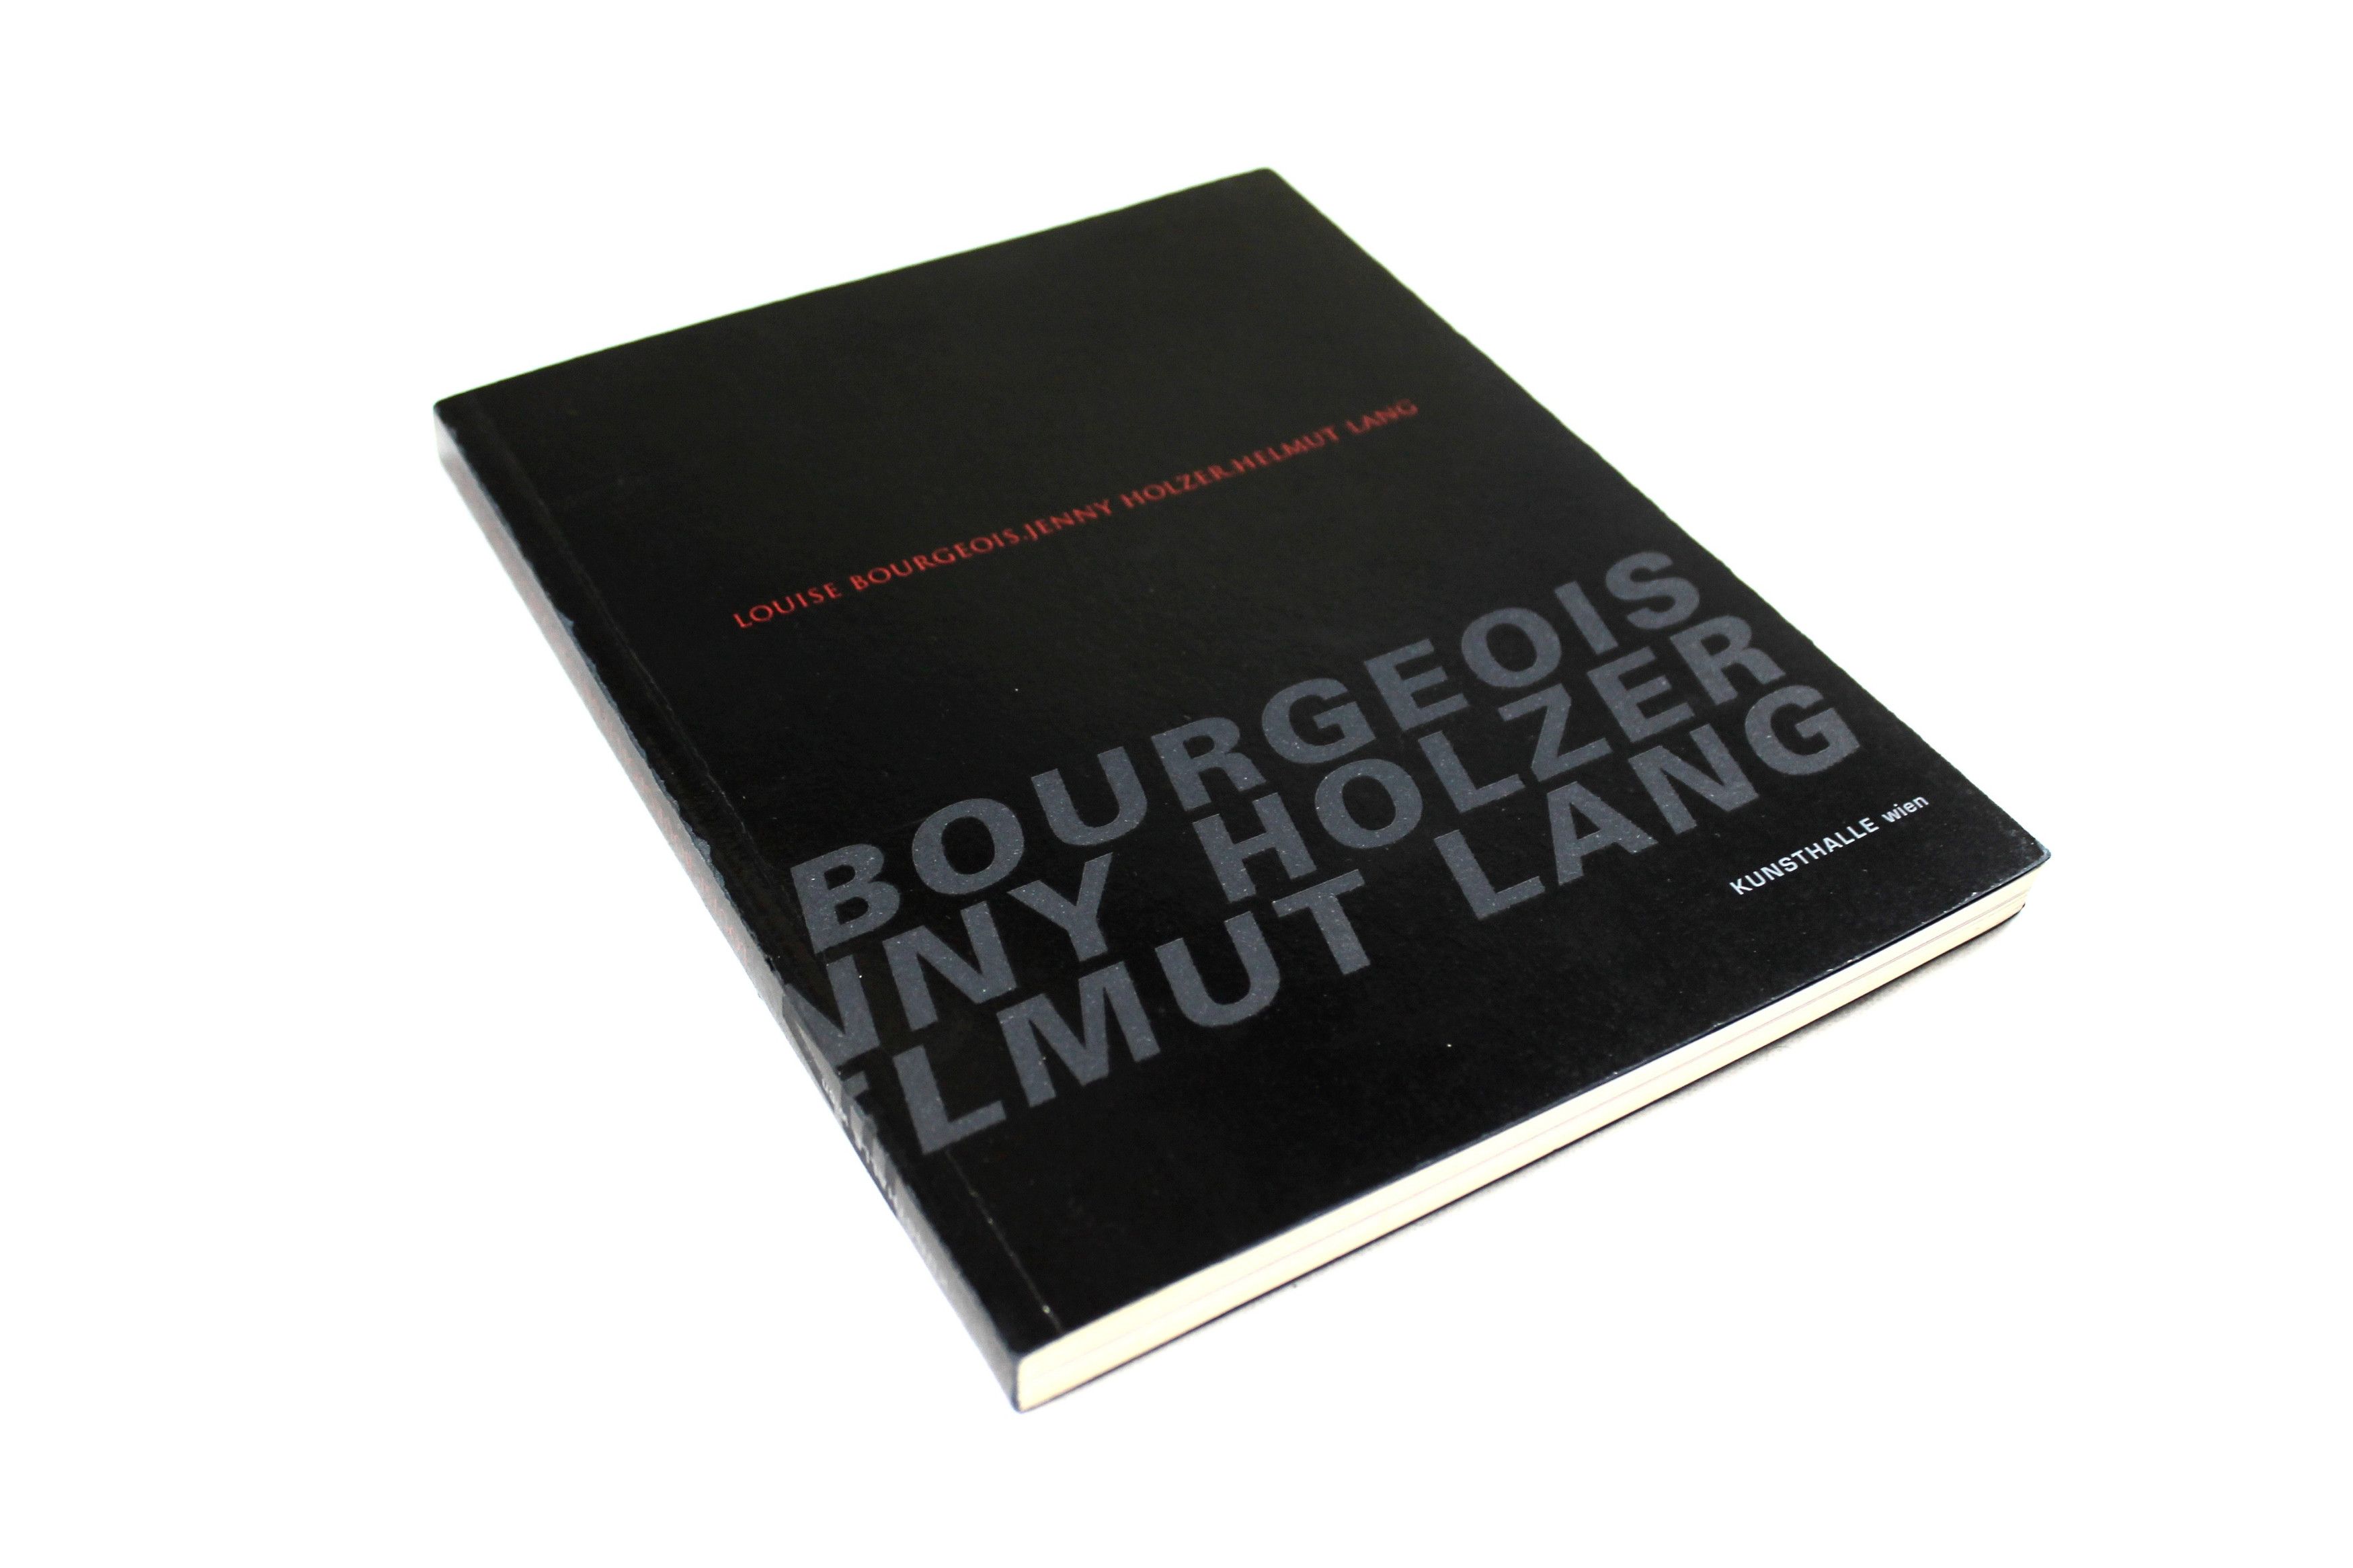 Louise Bourgeois, Jenny Holzer and Helmut Lang - Offbrand Library